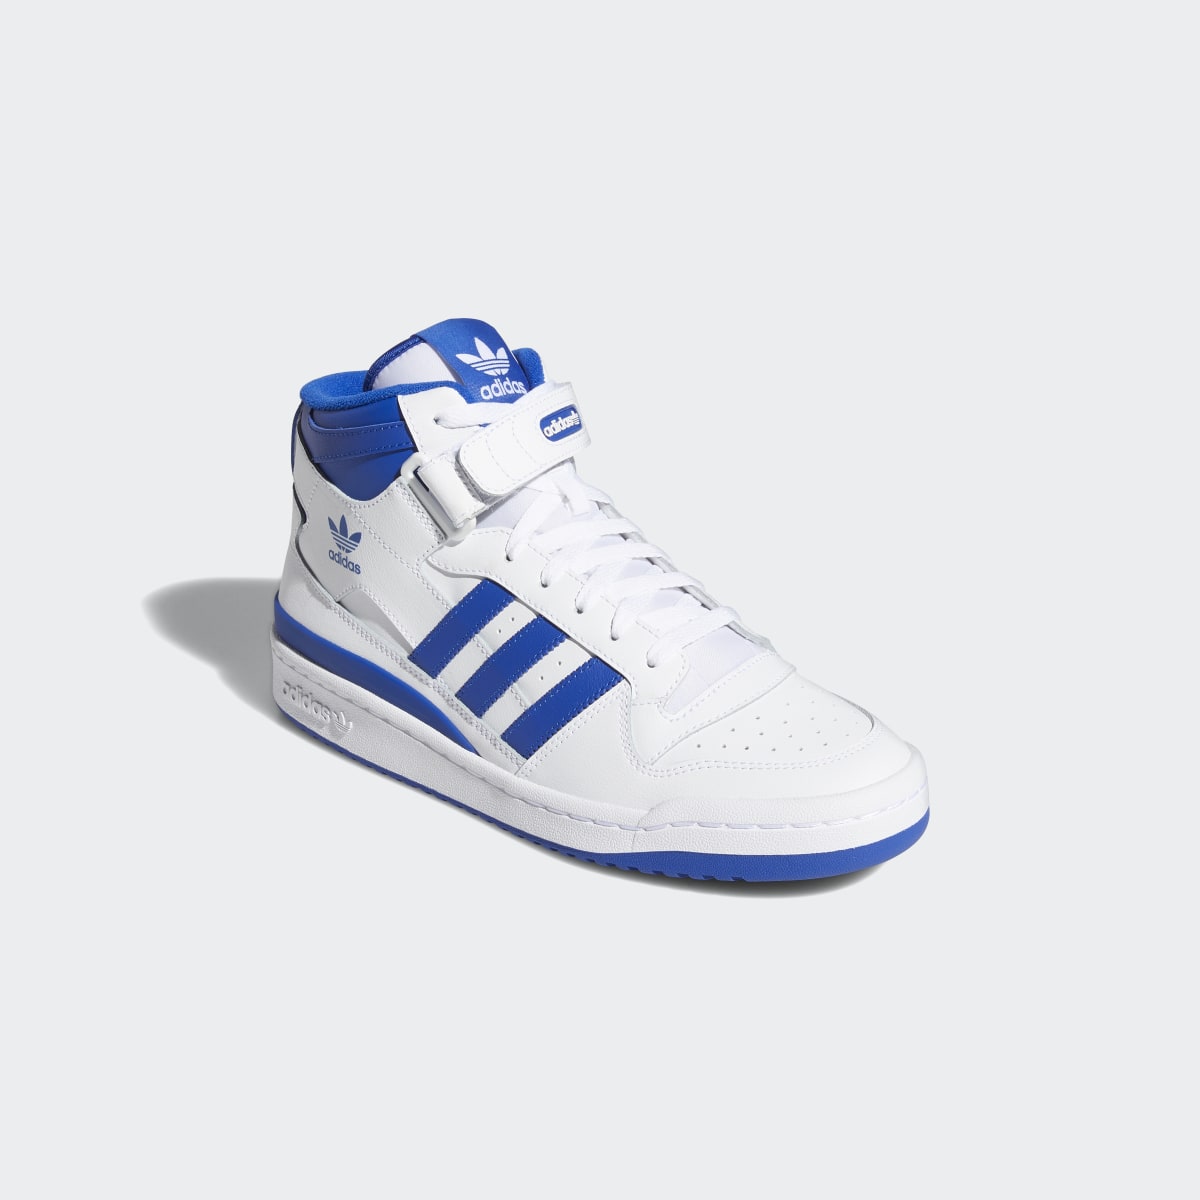 Adidas Forum Mid Shoes. 5